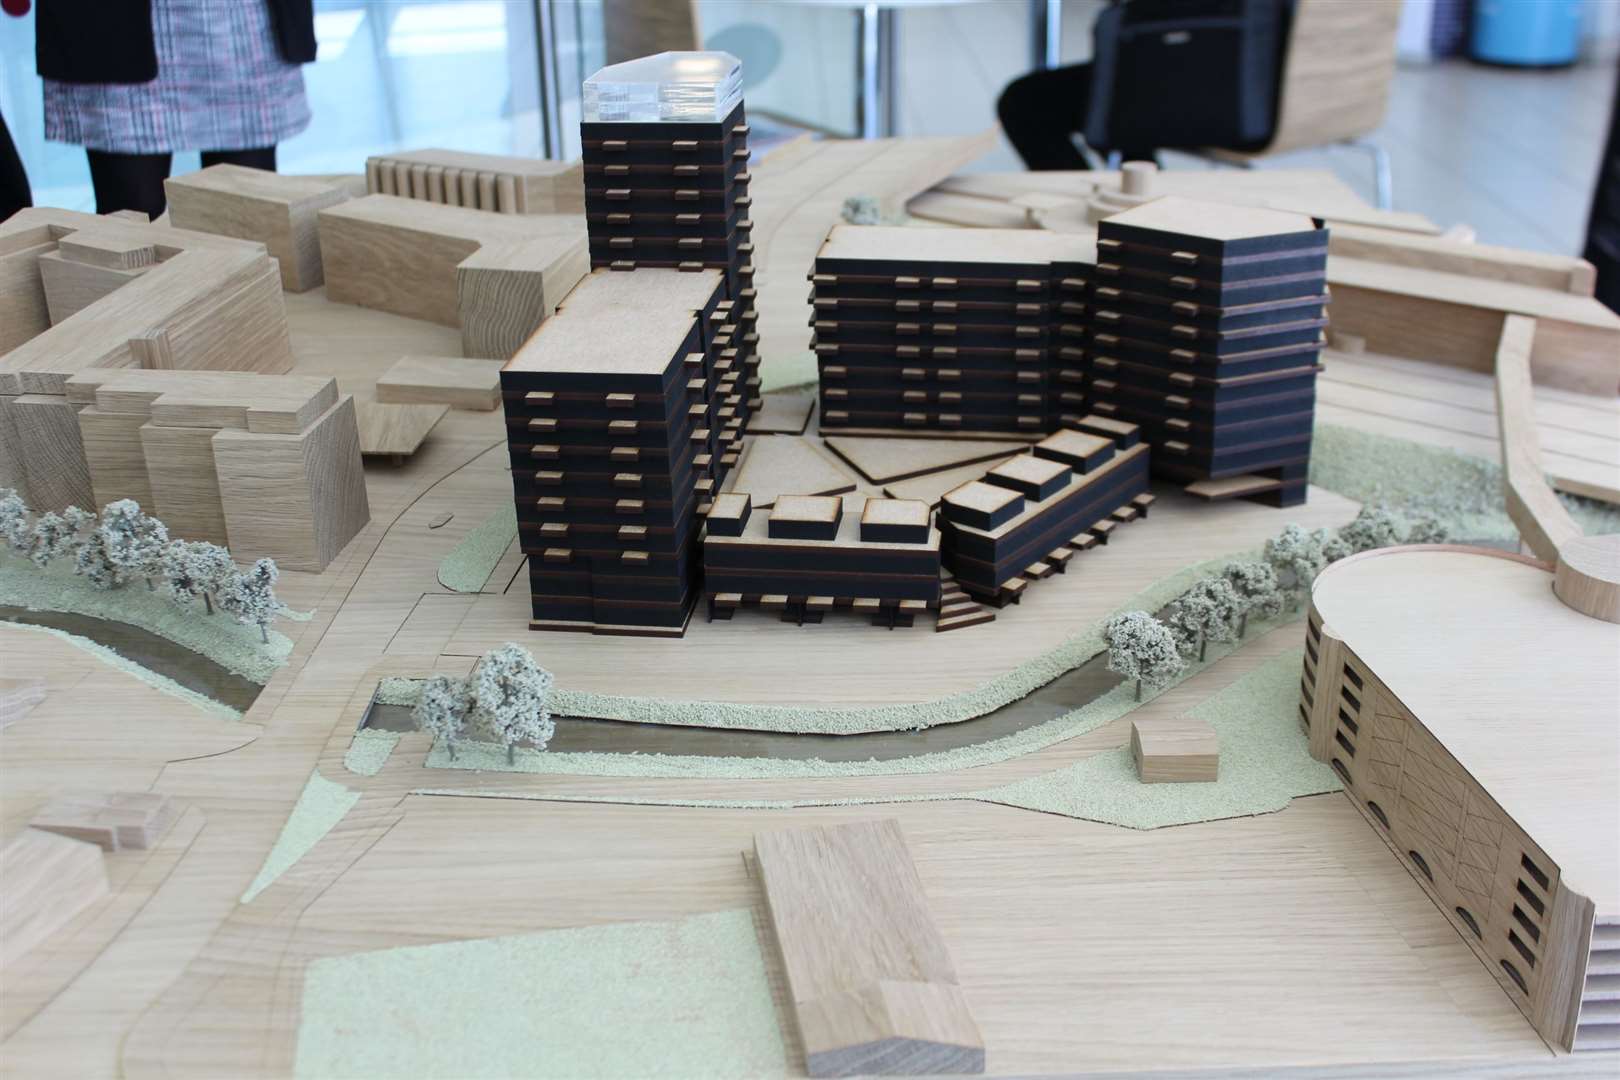 A model was made up showing the scheme. Picture: Jeff Sims